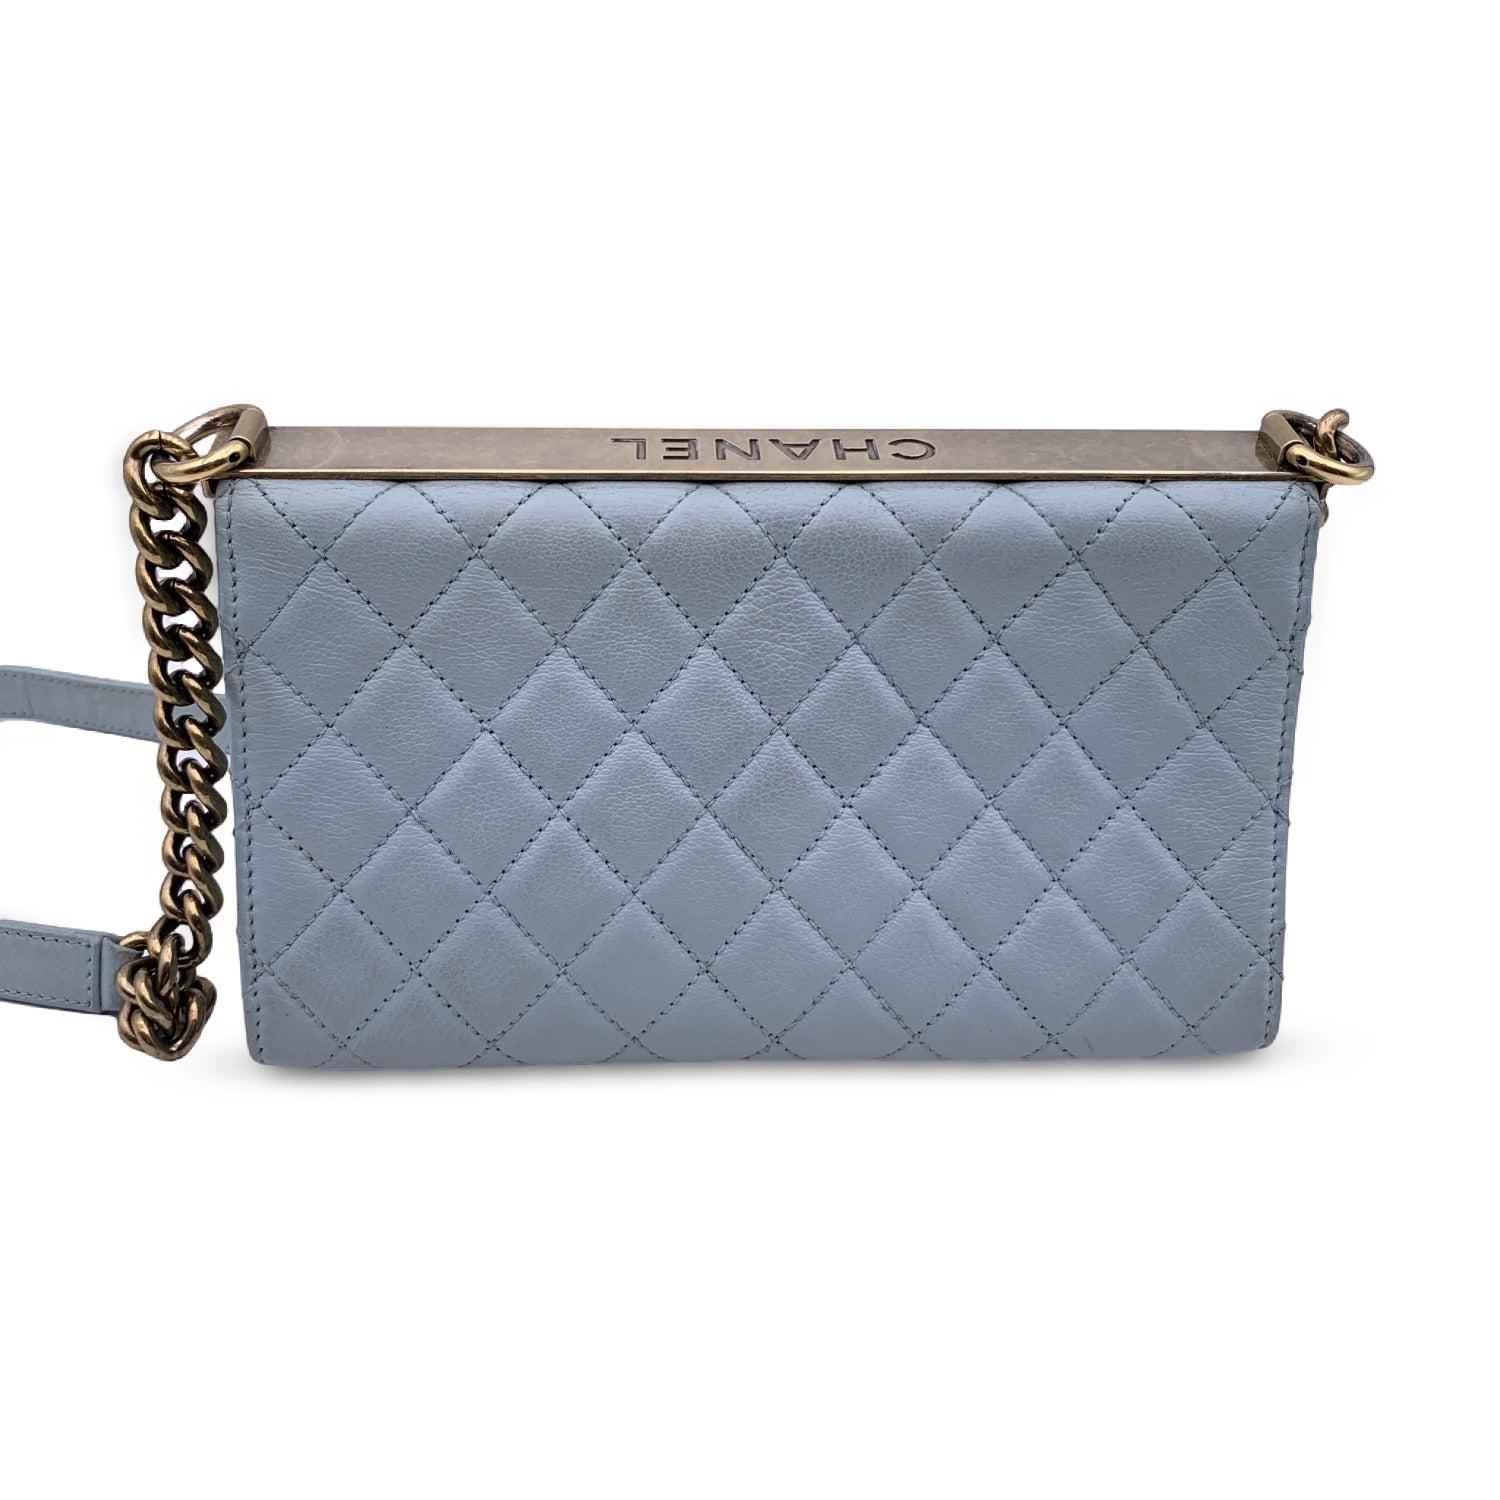 Chanel Light Blue Quilted Leather Trendy Reissue Shoulder Bag In Excellent Condition In Rome, Rome